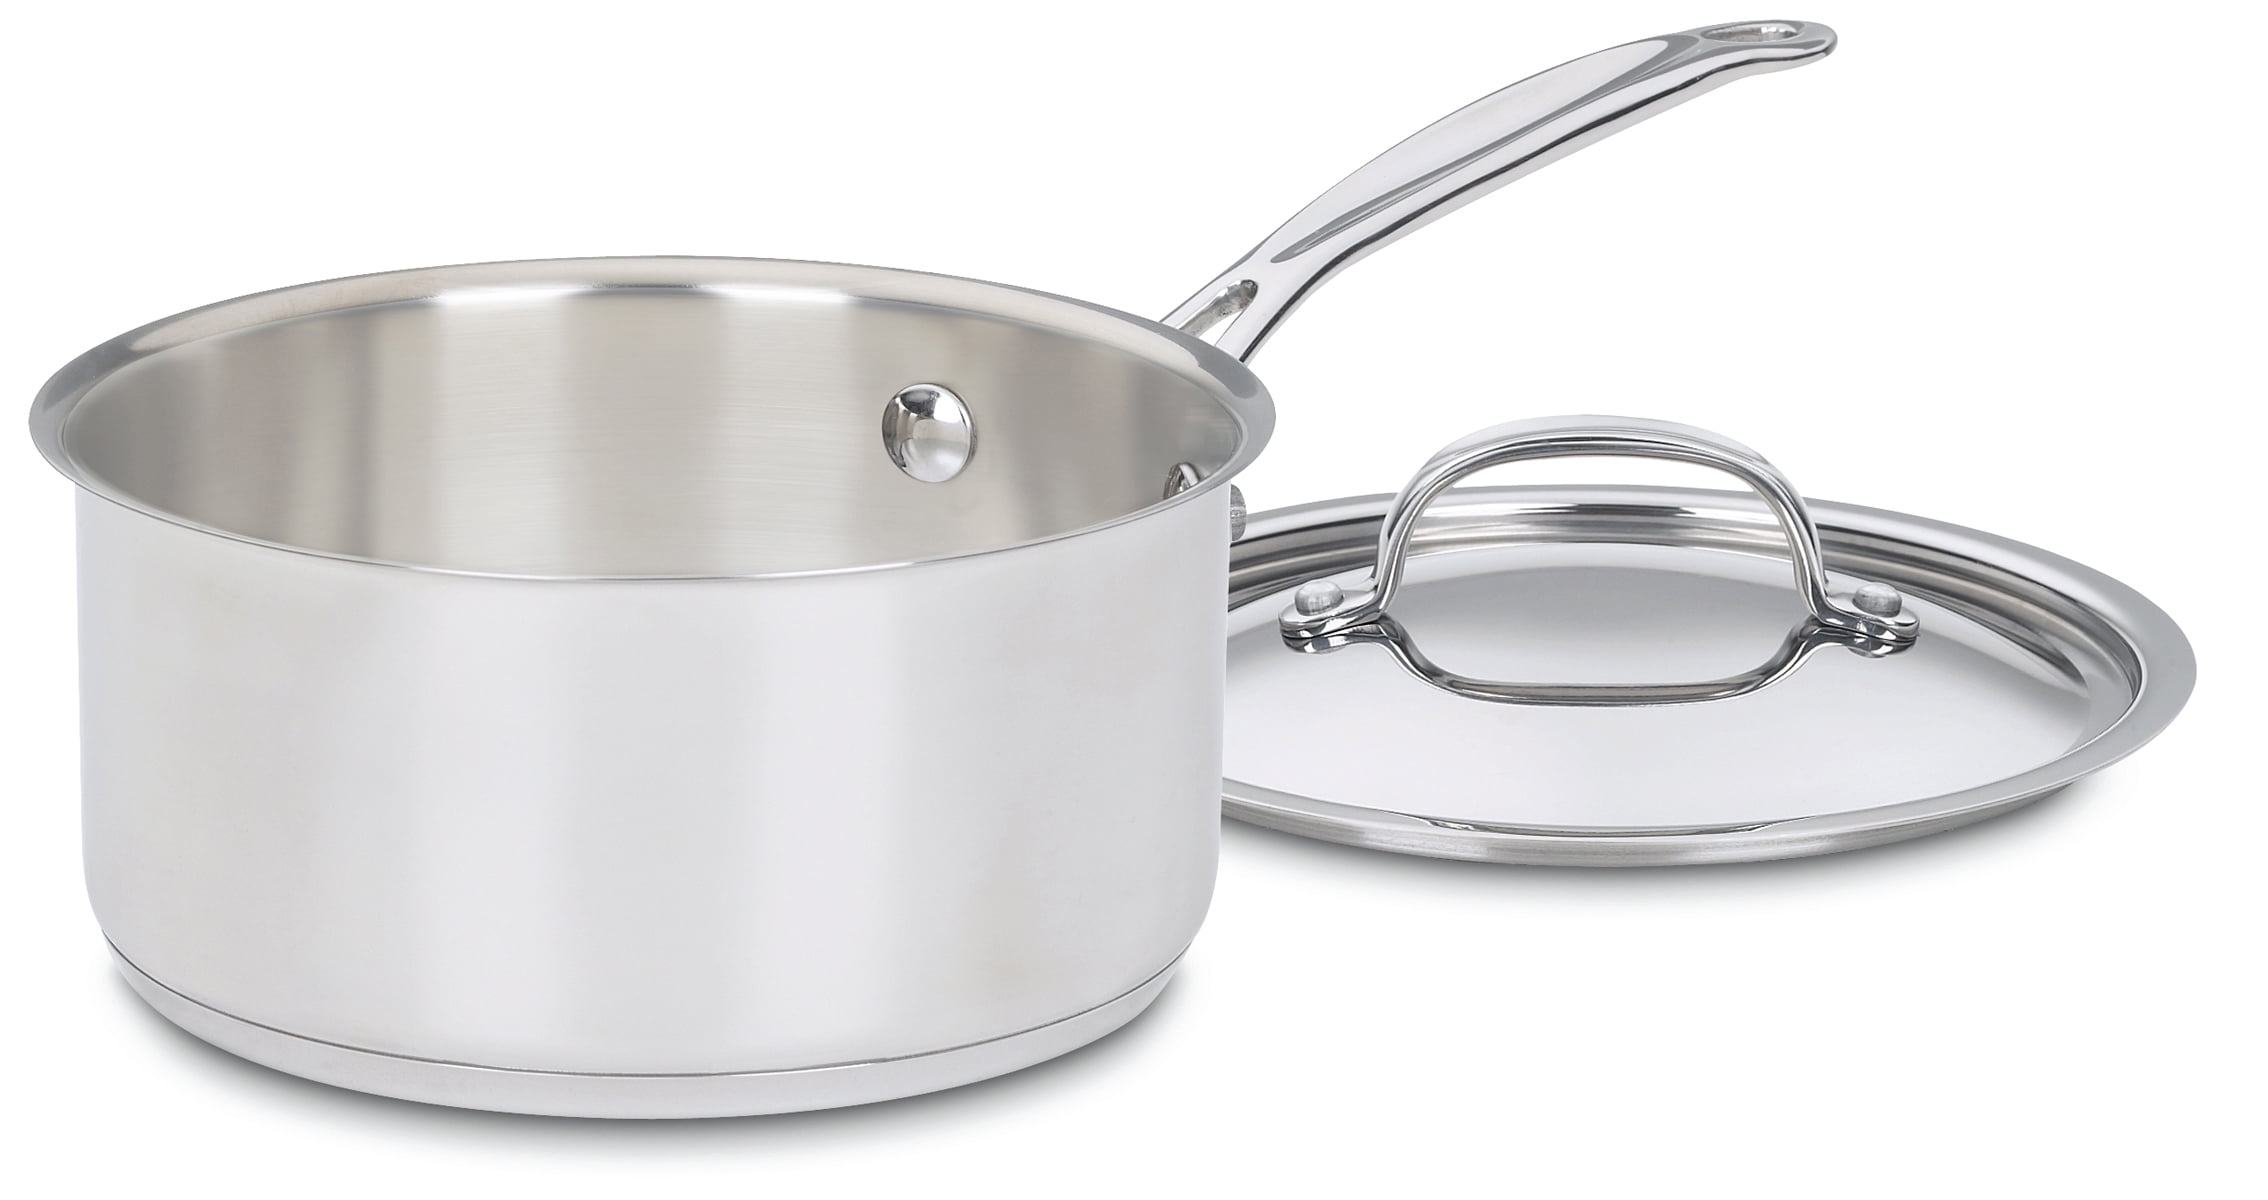 Walchoice 2qt and 1qt Saucepan Set, Stainless Steel Soup Pot with Lid for Home